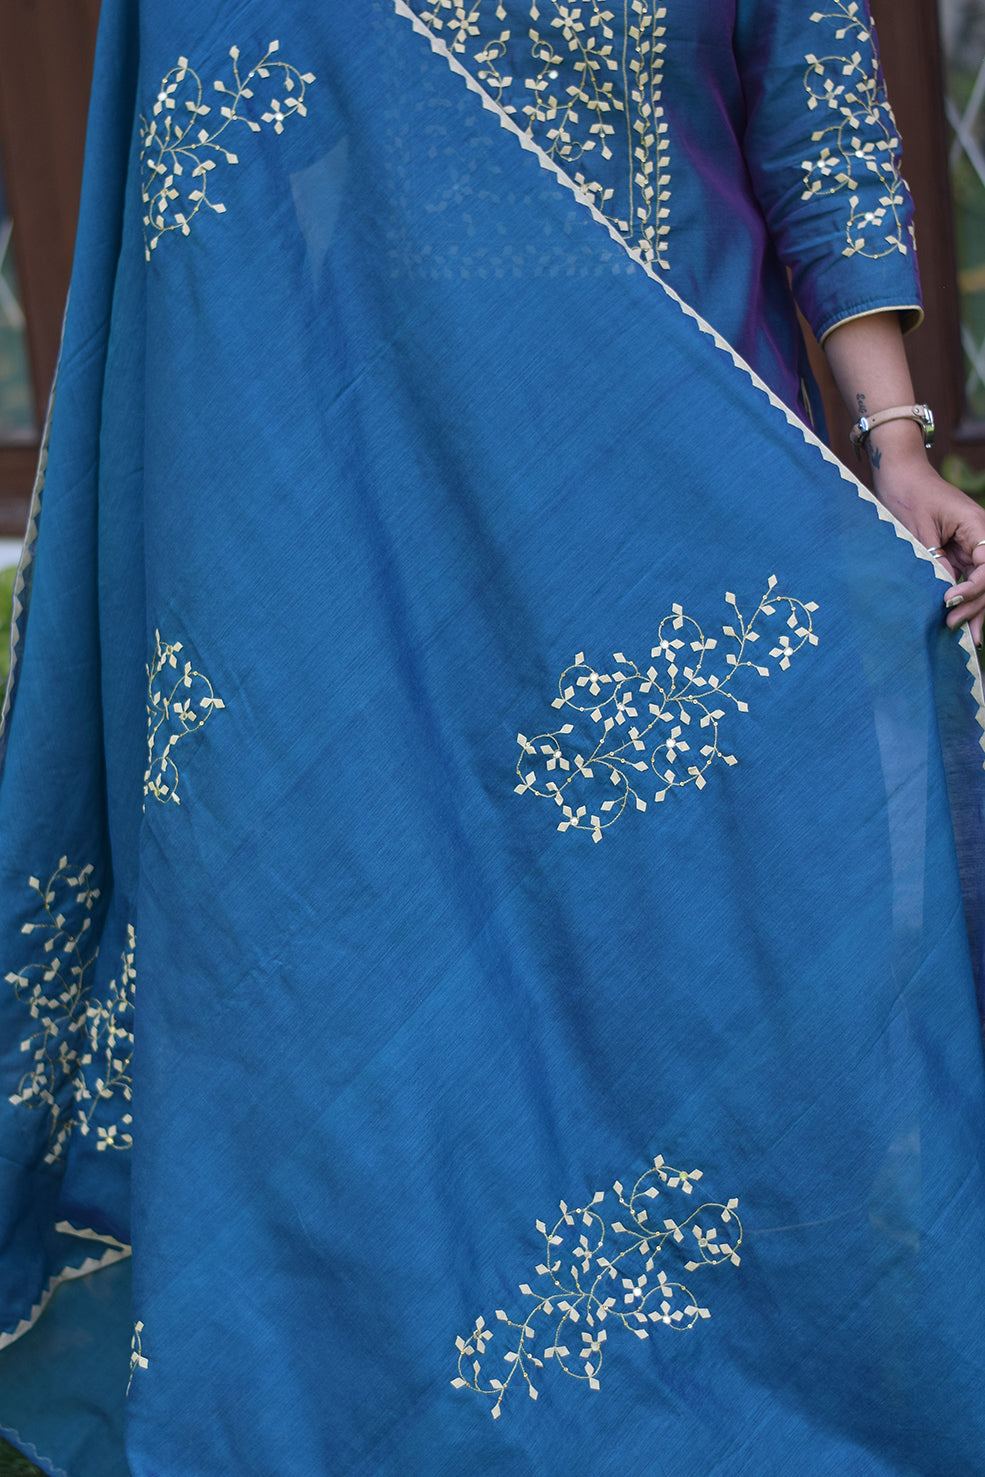 A solo Indian woman standing tall in a blue applique work suit with her arms folded.